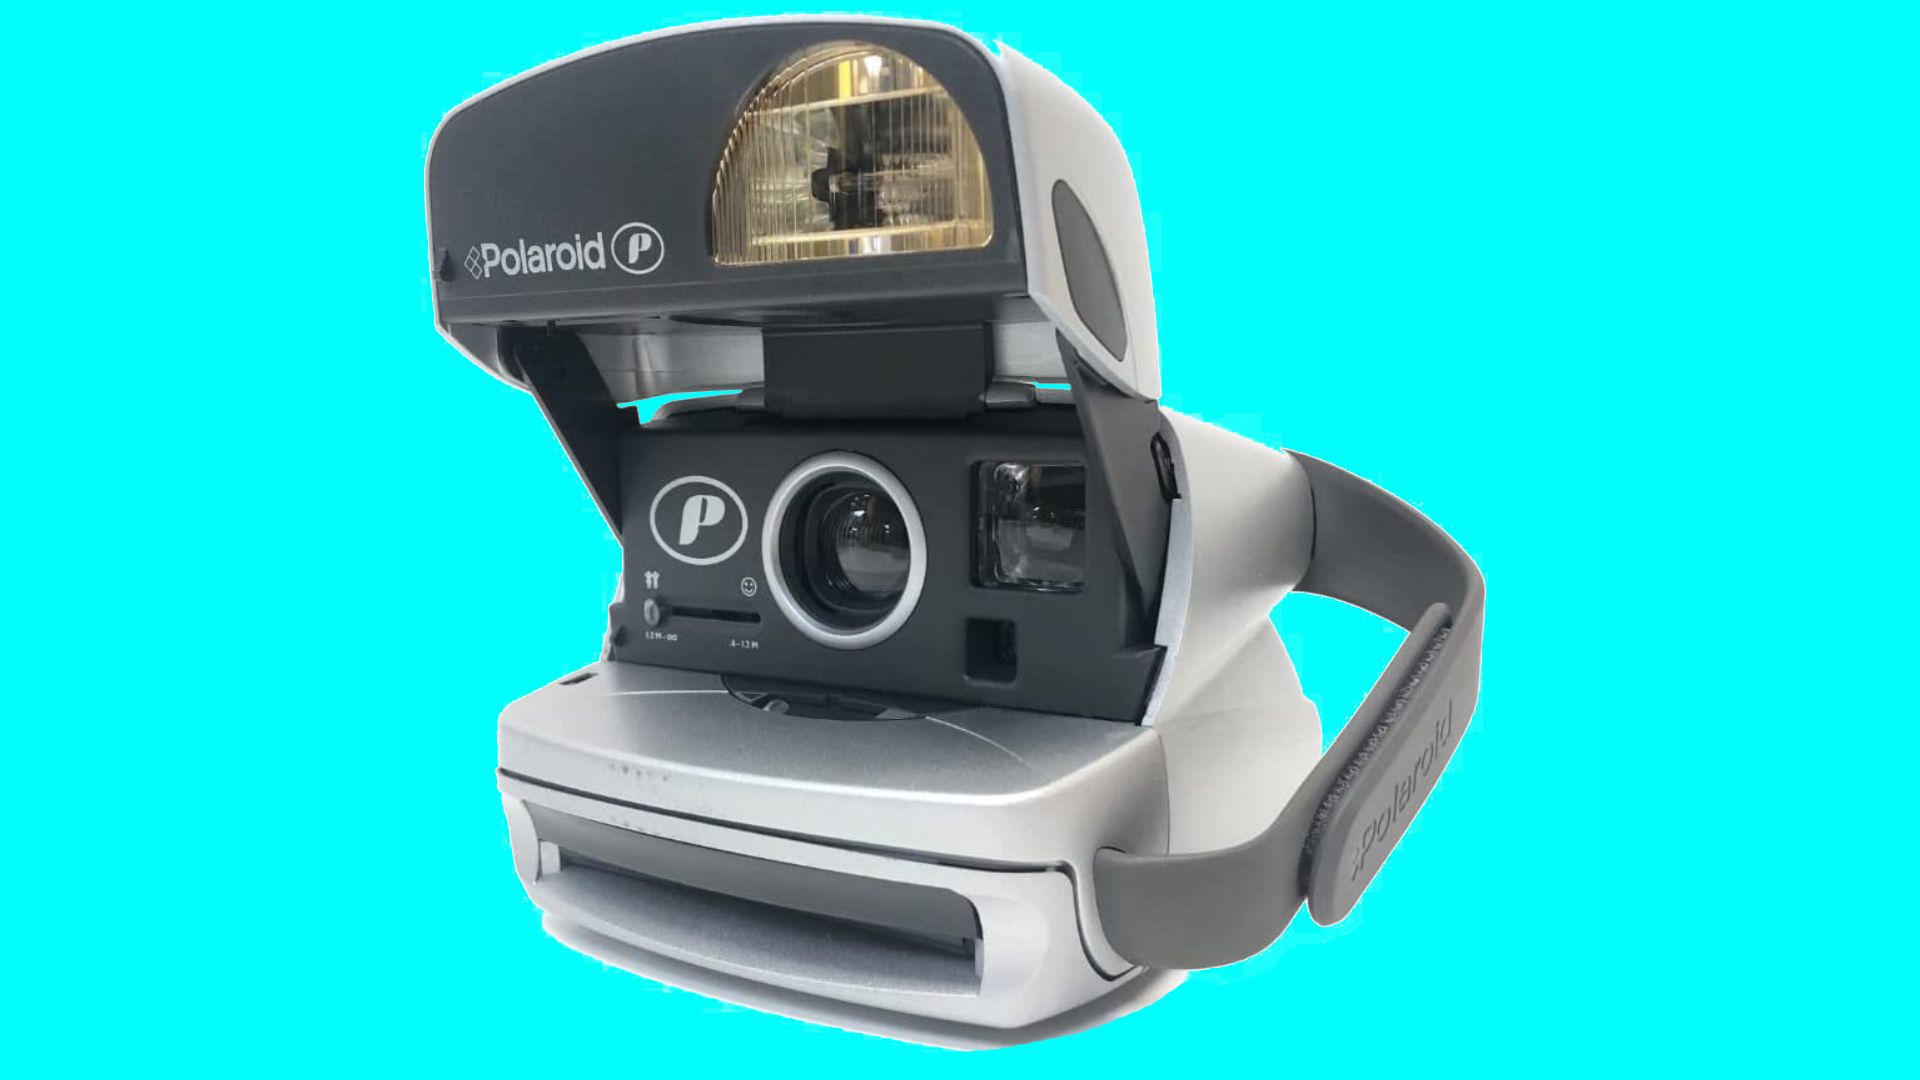 A Polaroid P600 instant camera on a bright blue background